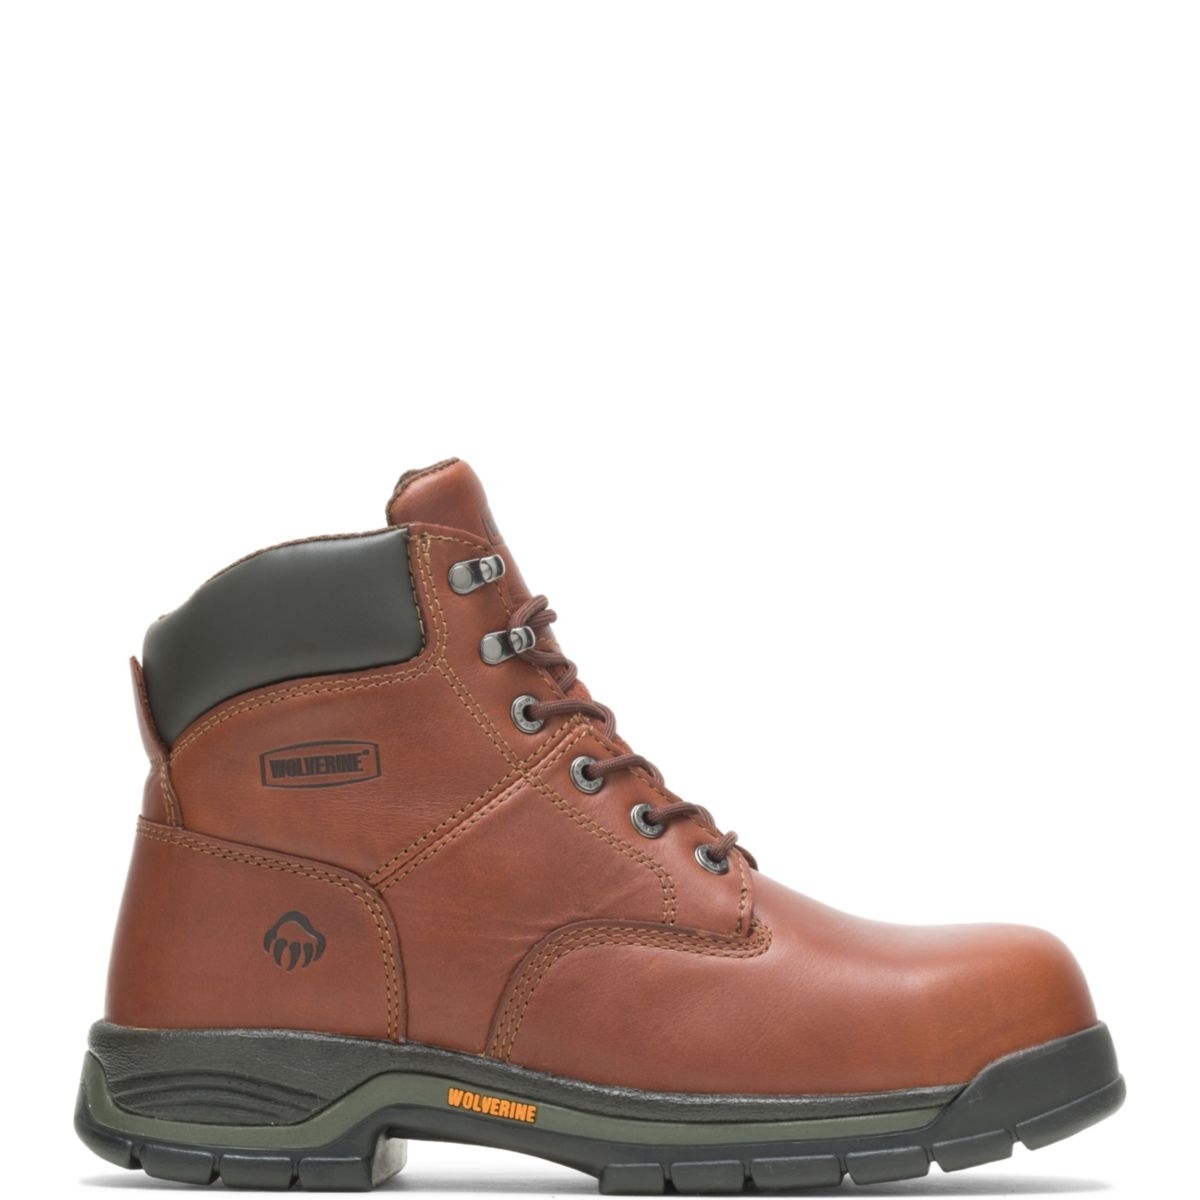 WOLVERINE Men's Harrison 6 Lace-Up SoftToe Work Boot Brown - W04906 Varies BROWN - BROWN, 8.5 X-Wide